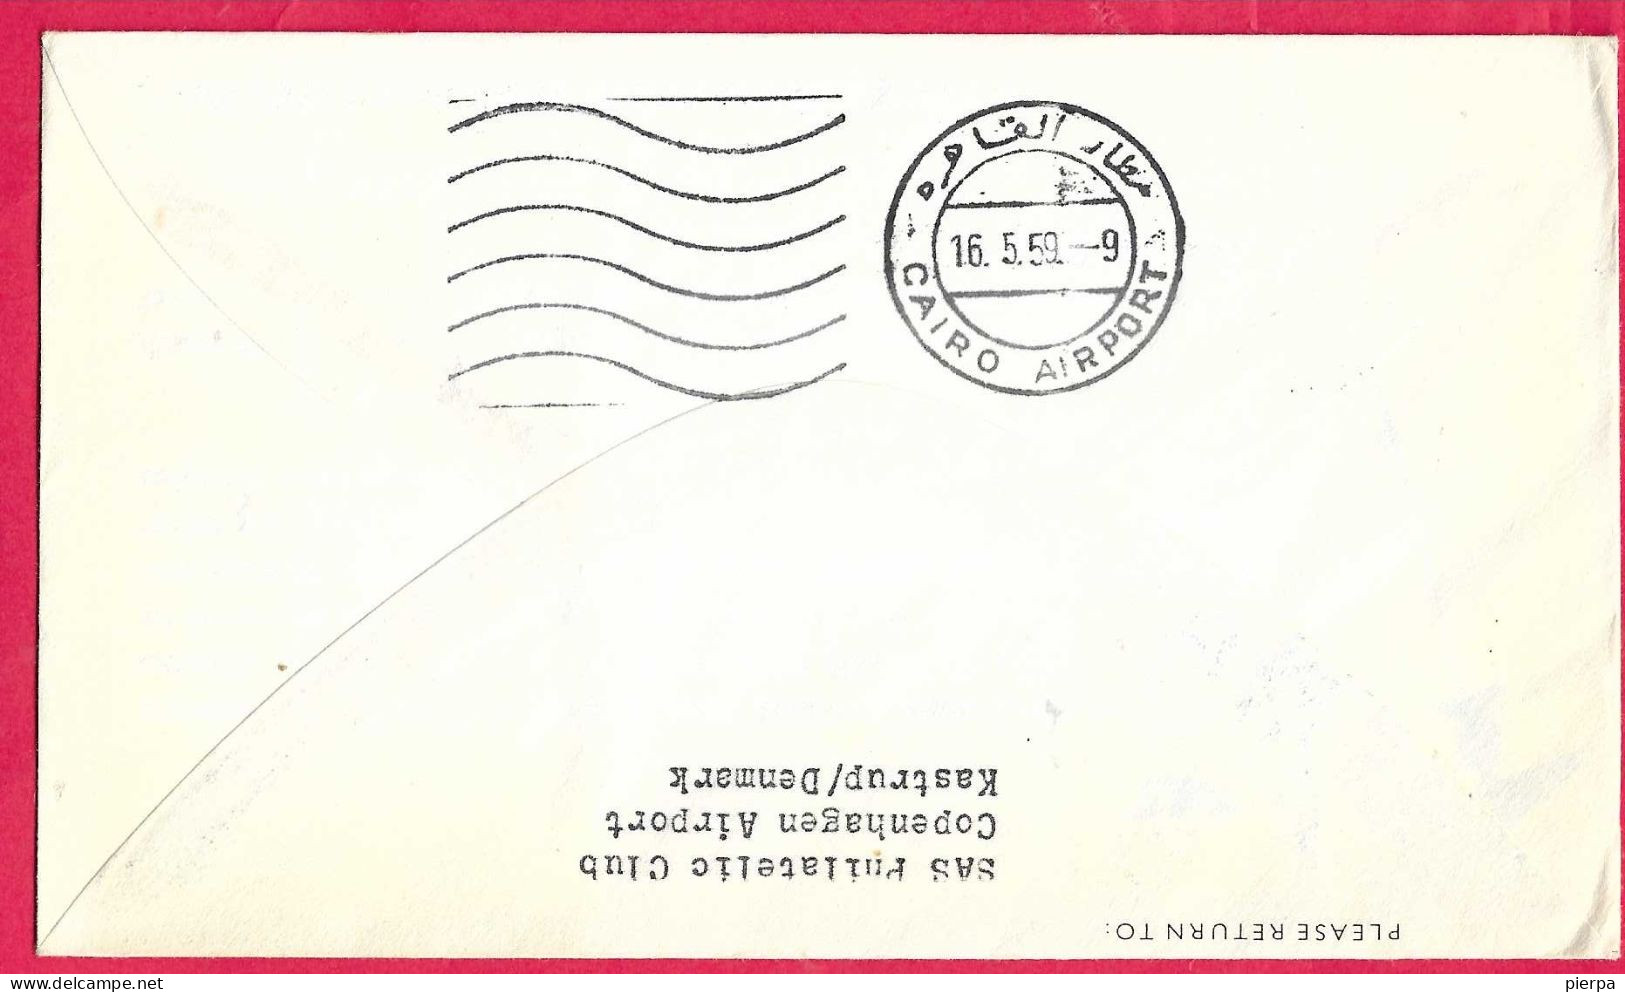 DANMARK - FIRST CARAVELLE FLIGHT - SAS - FROM KOBENHAVN TO  CAIRO *15.5.59* ON OFFICIAL COVER - Poste Aérienne